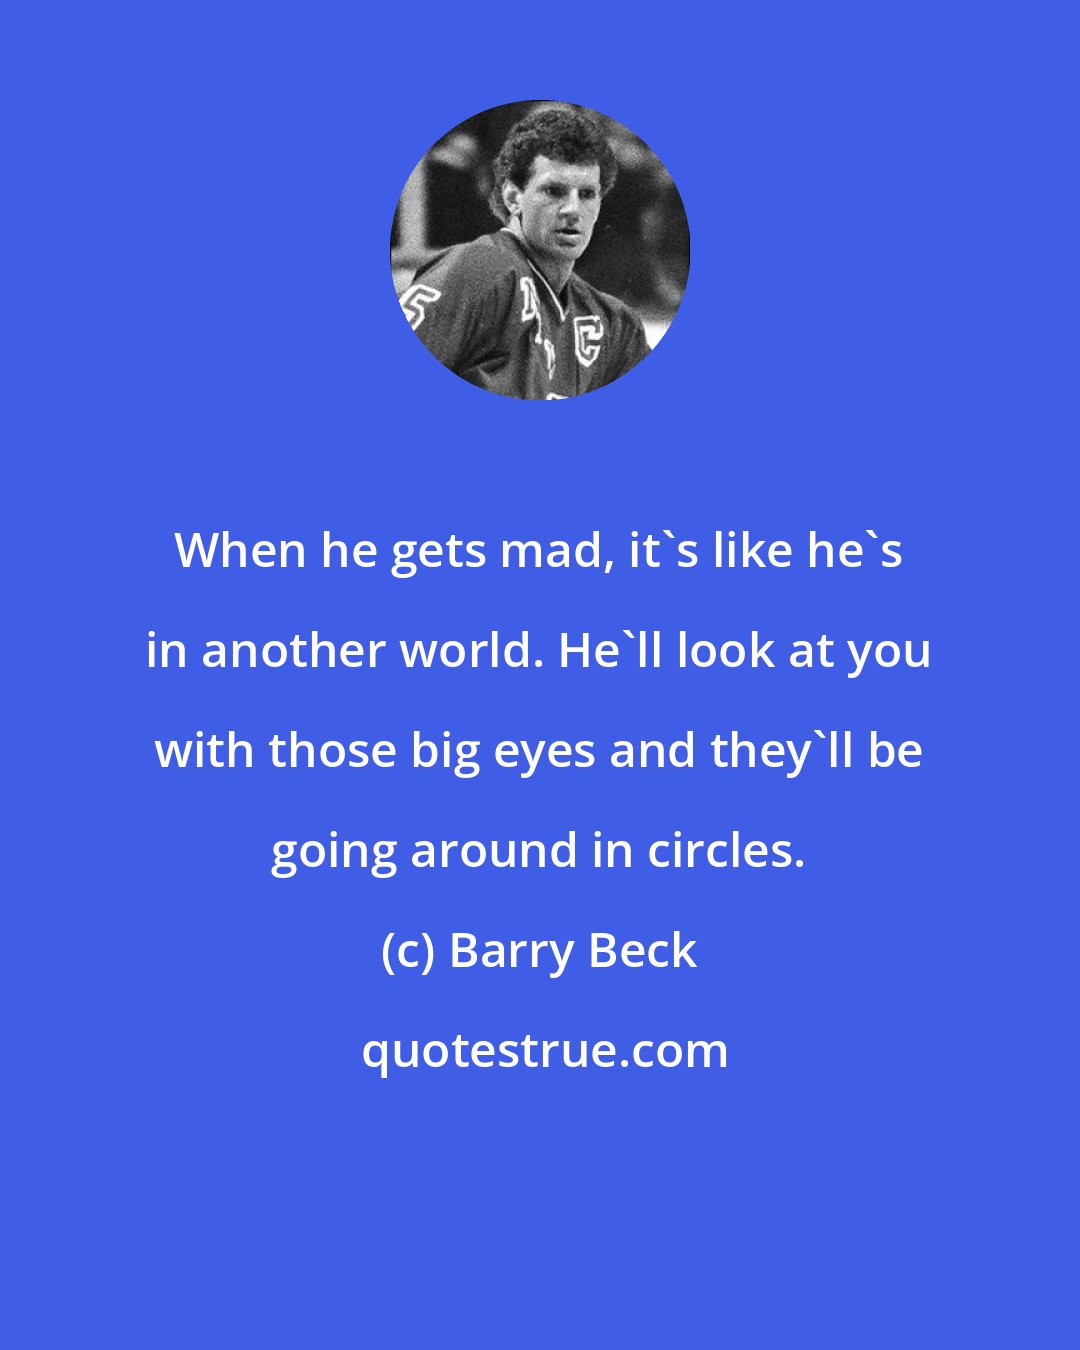 Barry Beck: When he gets mad, it's like he's in another world. He'll look at you with those big eyes and they'll be going around in circles.